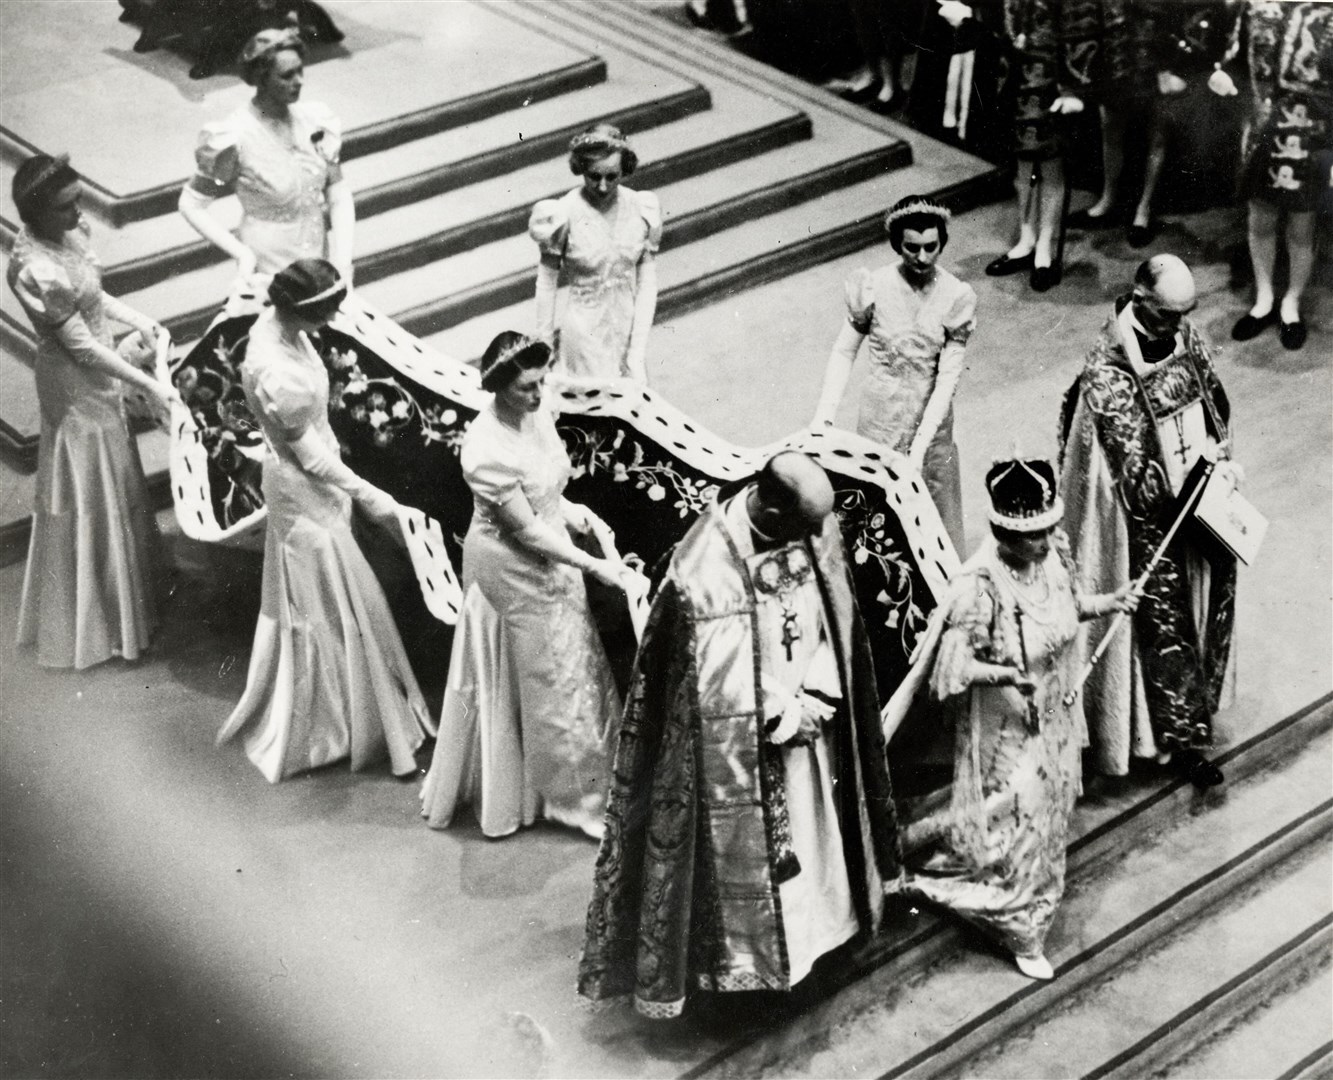 Queen Elizabeth (later the Queen Mother) holding her two sceptres at George VI’s coronation in 1937 (Pump Park Vintage Photography/Alamy/PA)